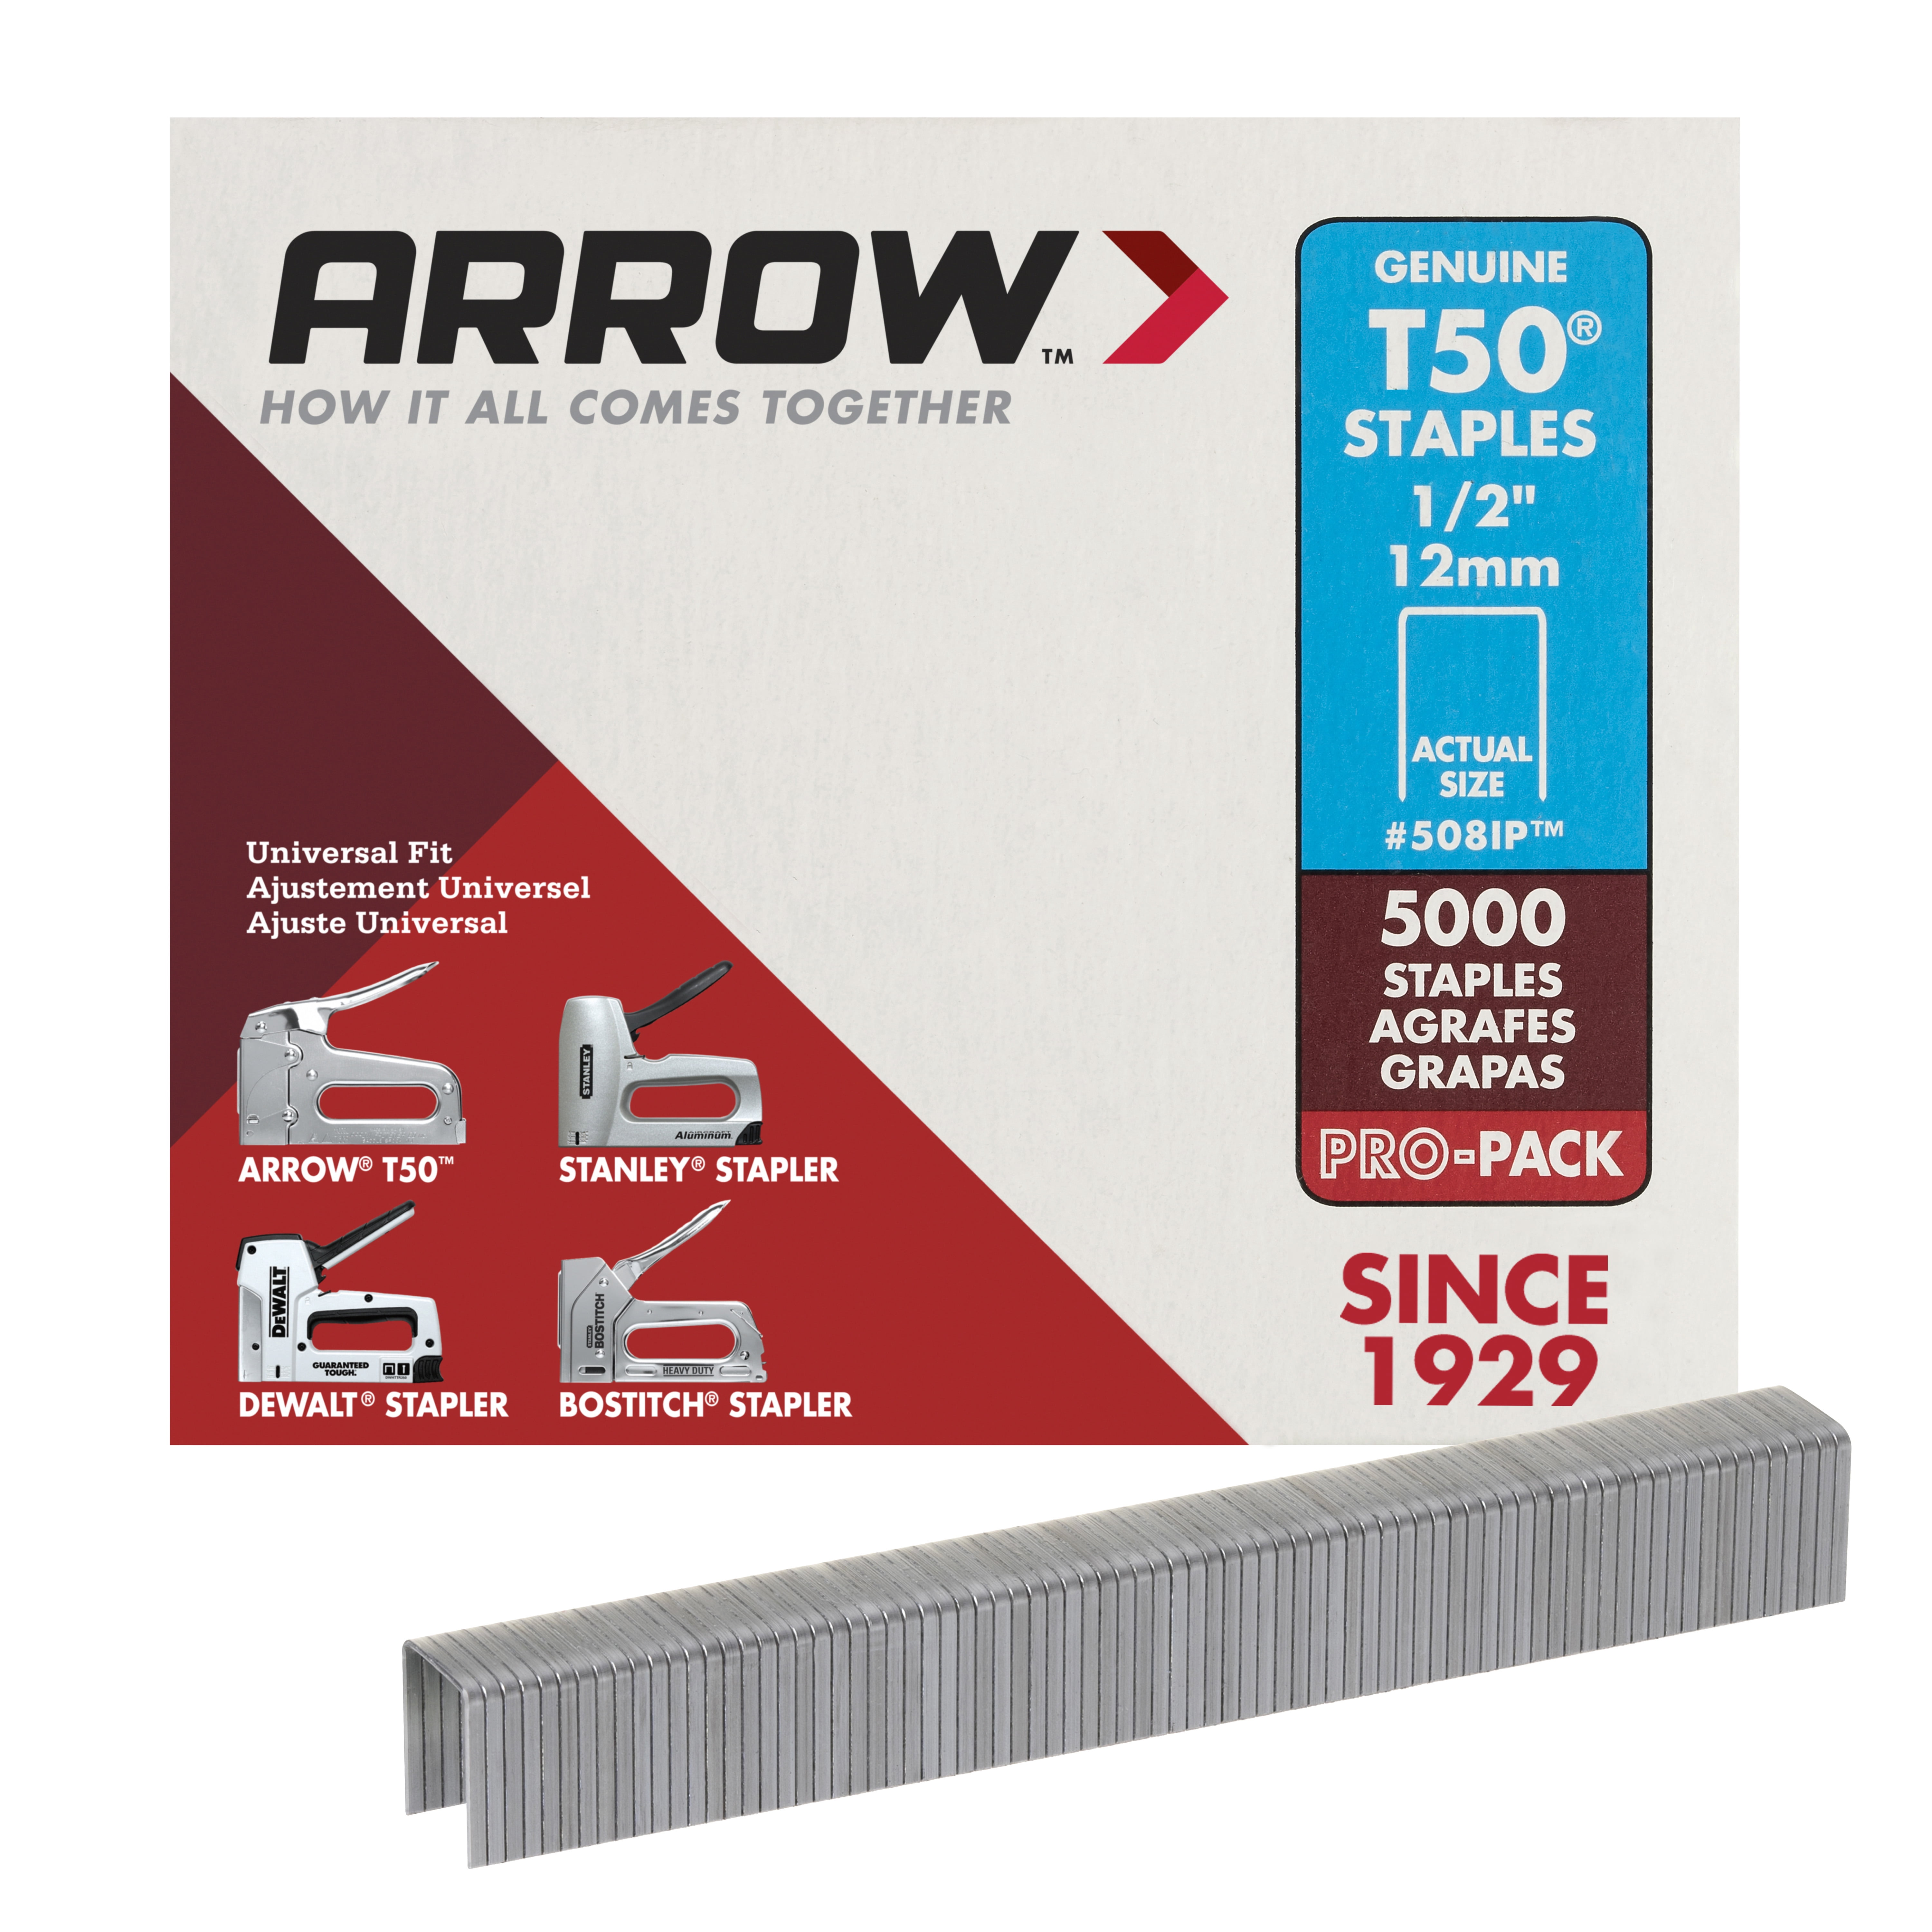 Type T50 Staples Arrow 1/2 Inch 12 MM New In Box 